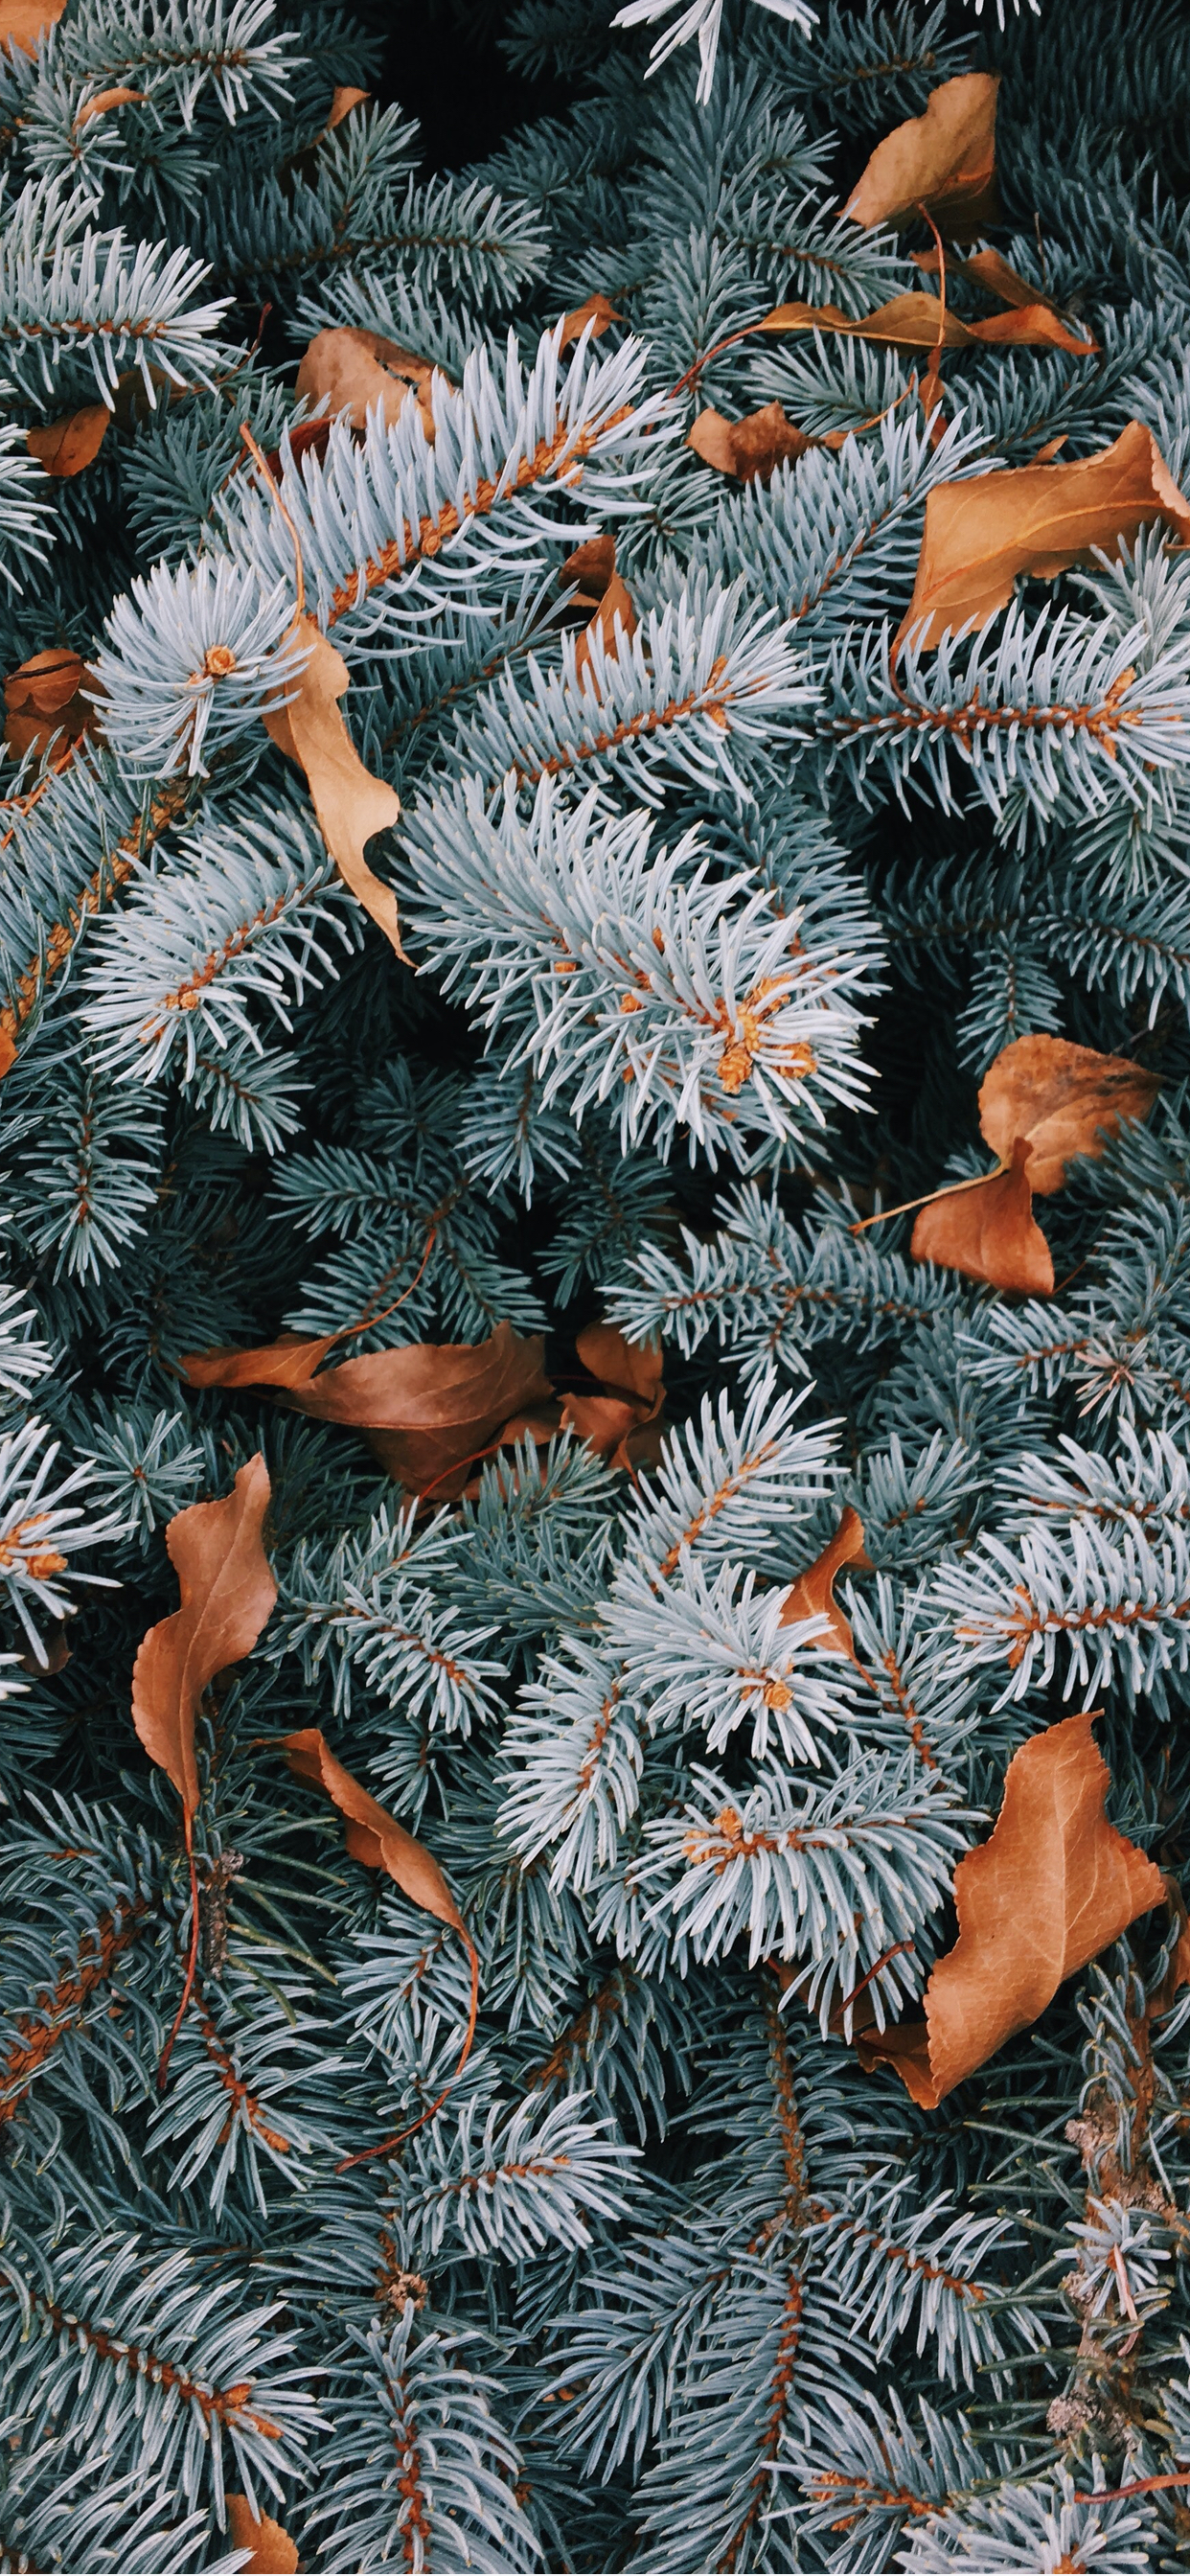 Free download The beginning of winter wallpapers for iPhone